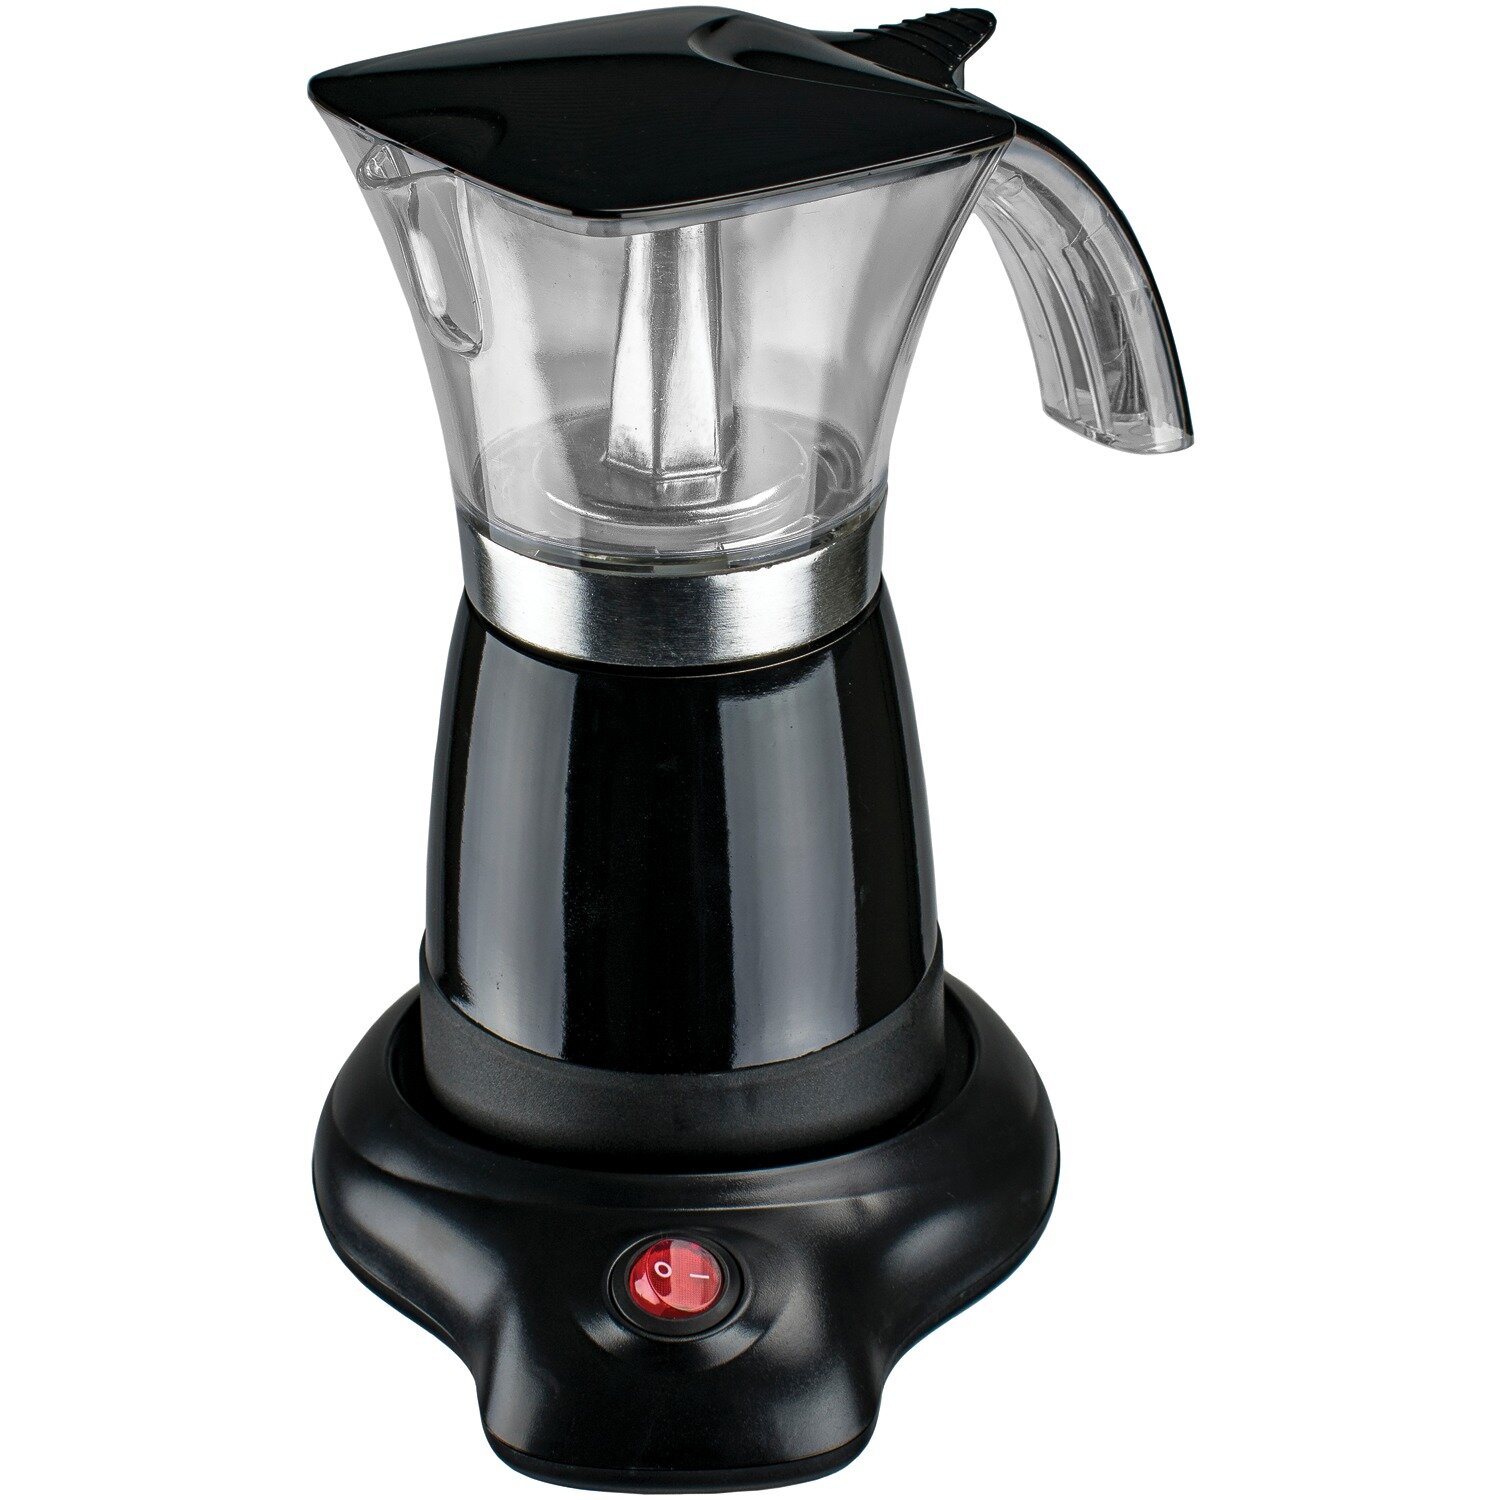 How does an electric espresso maker compare to a stovetop model